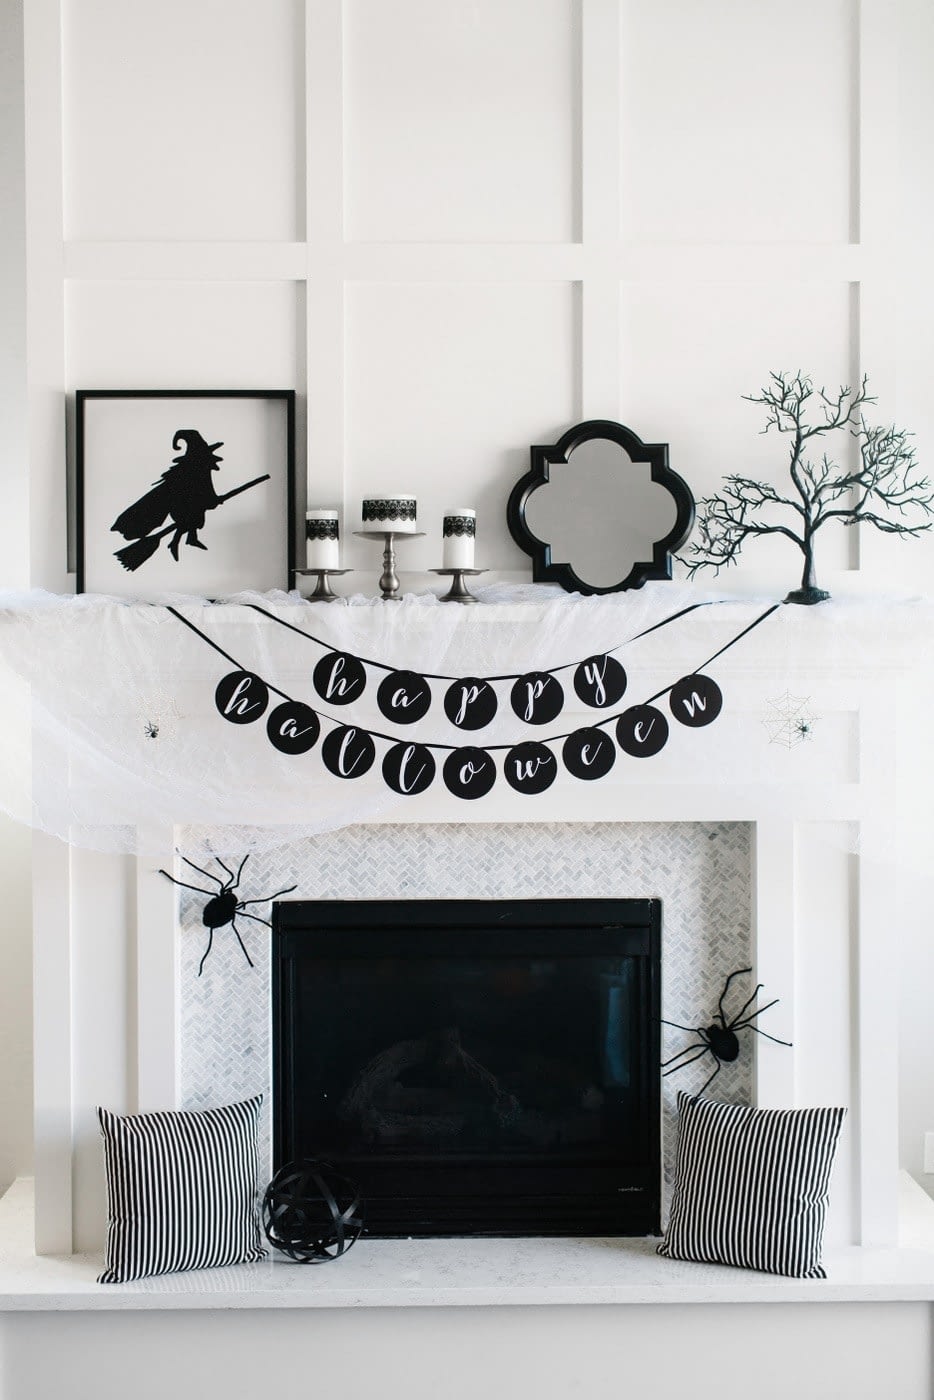 Fall mantel ideas for a halloween mantel using black and white decor and fake spiders